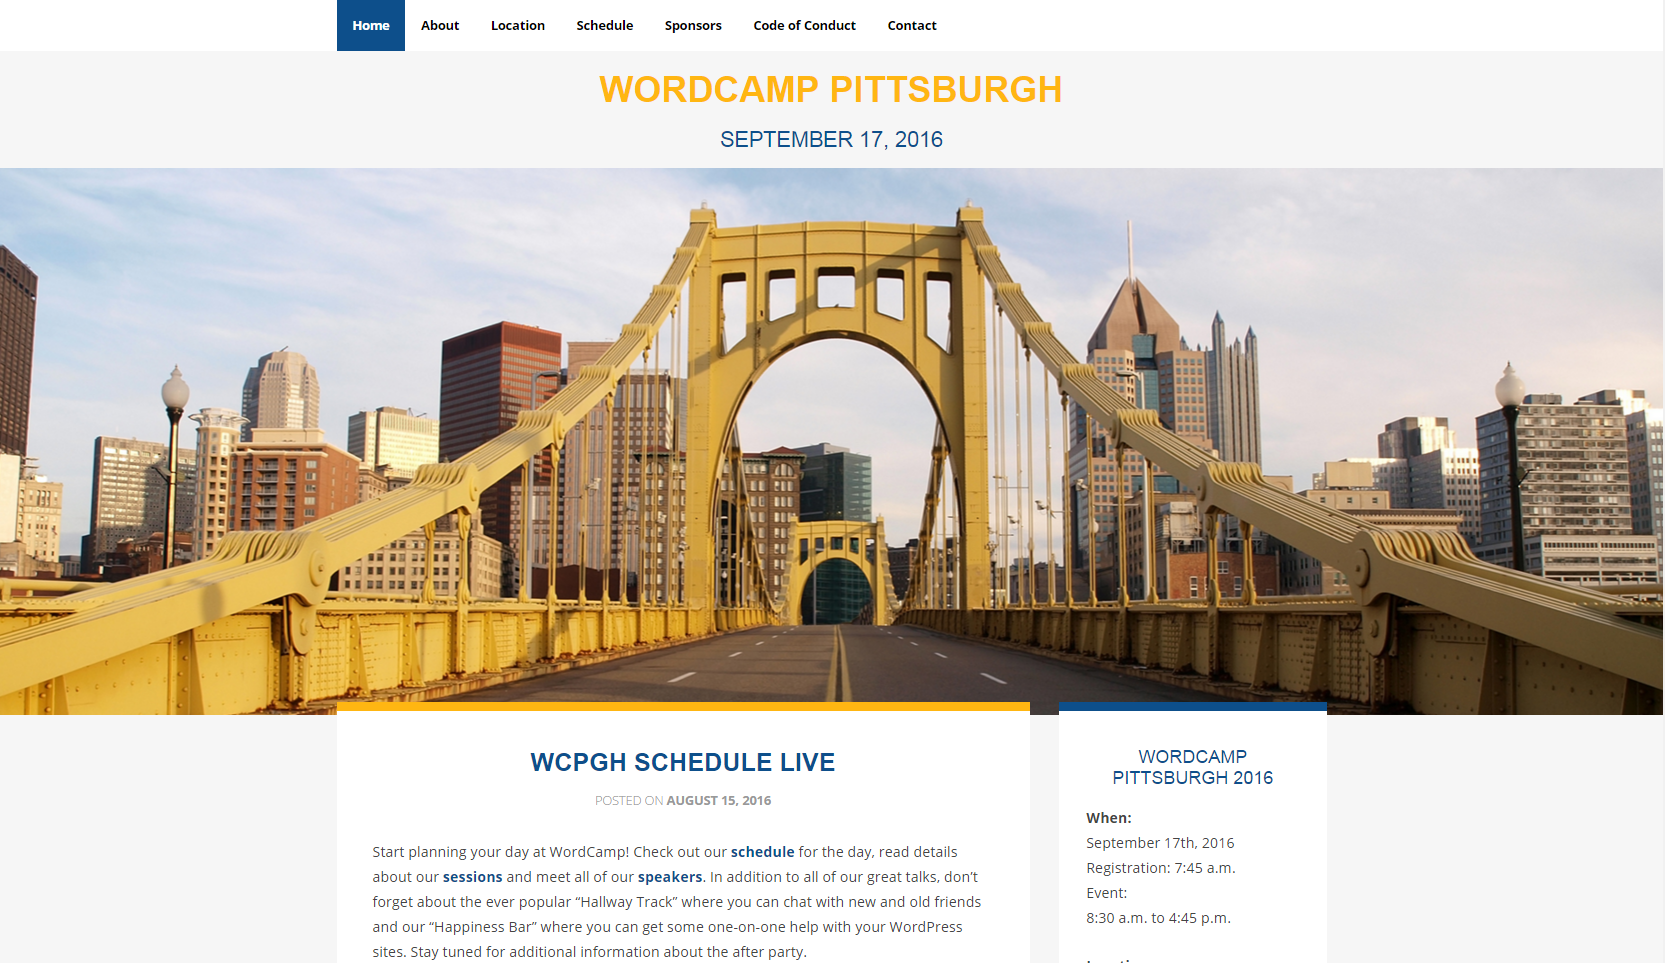 fireshot-capture-17-wordcamp-pittsburgh-i-septembe_-https___2016-pittsburgh-wordcamp-org_page_3_